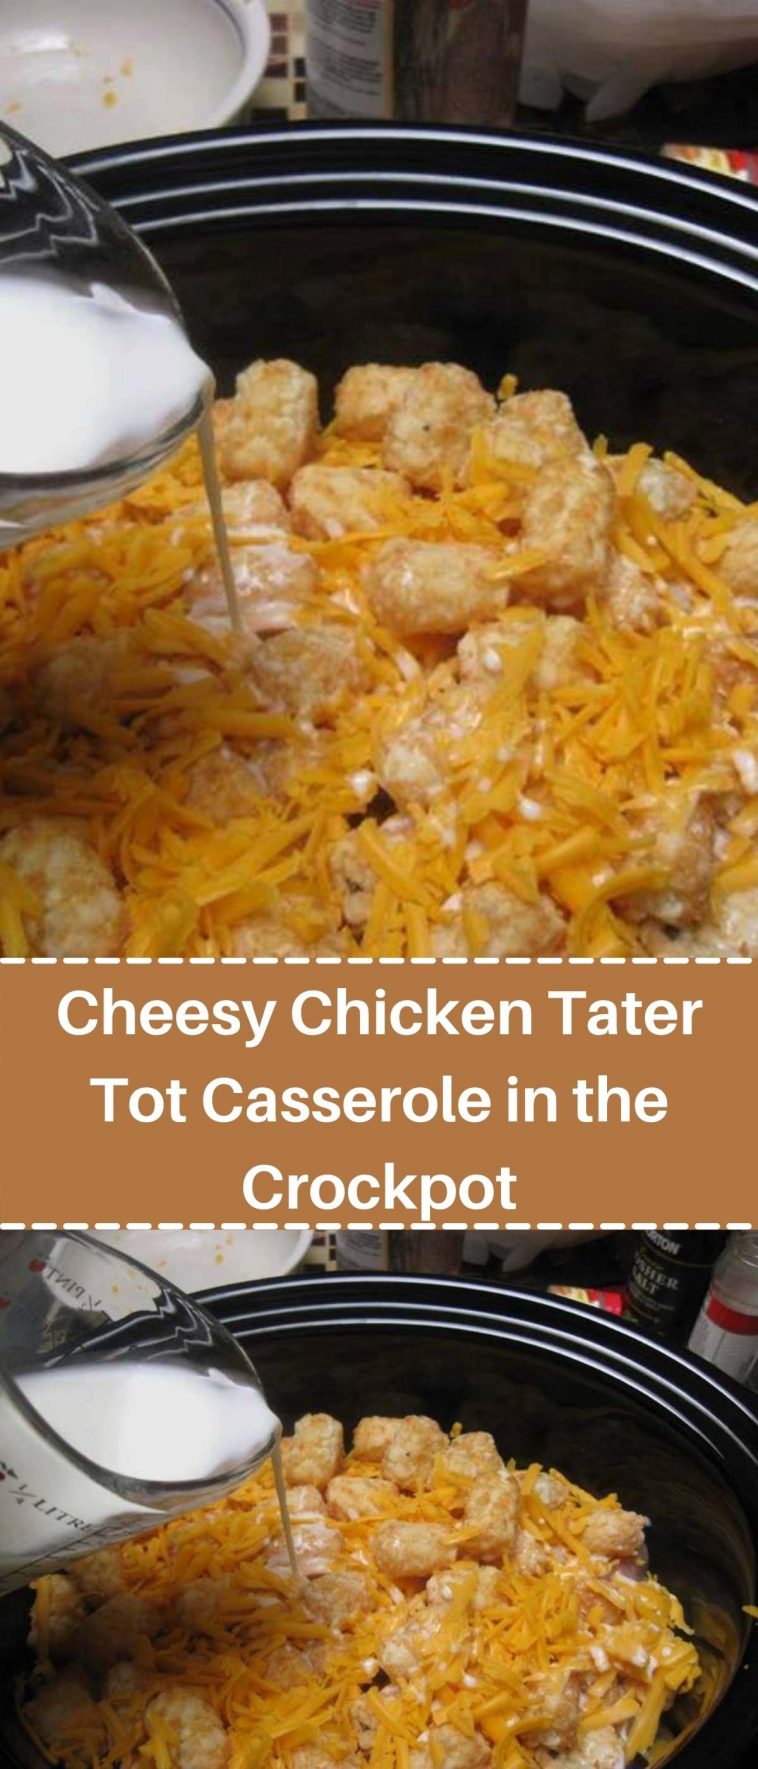 Cheesy Chicken Tater Tot Casserole in the Crockpot